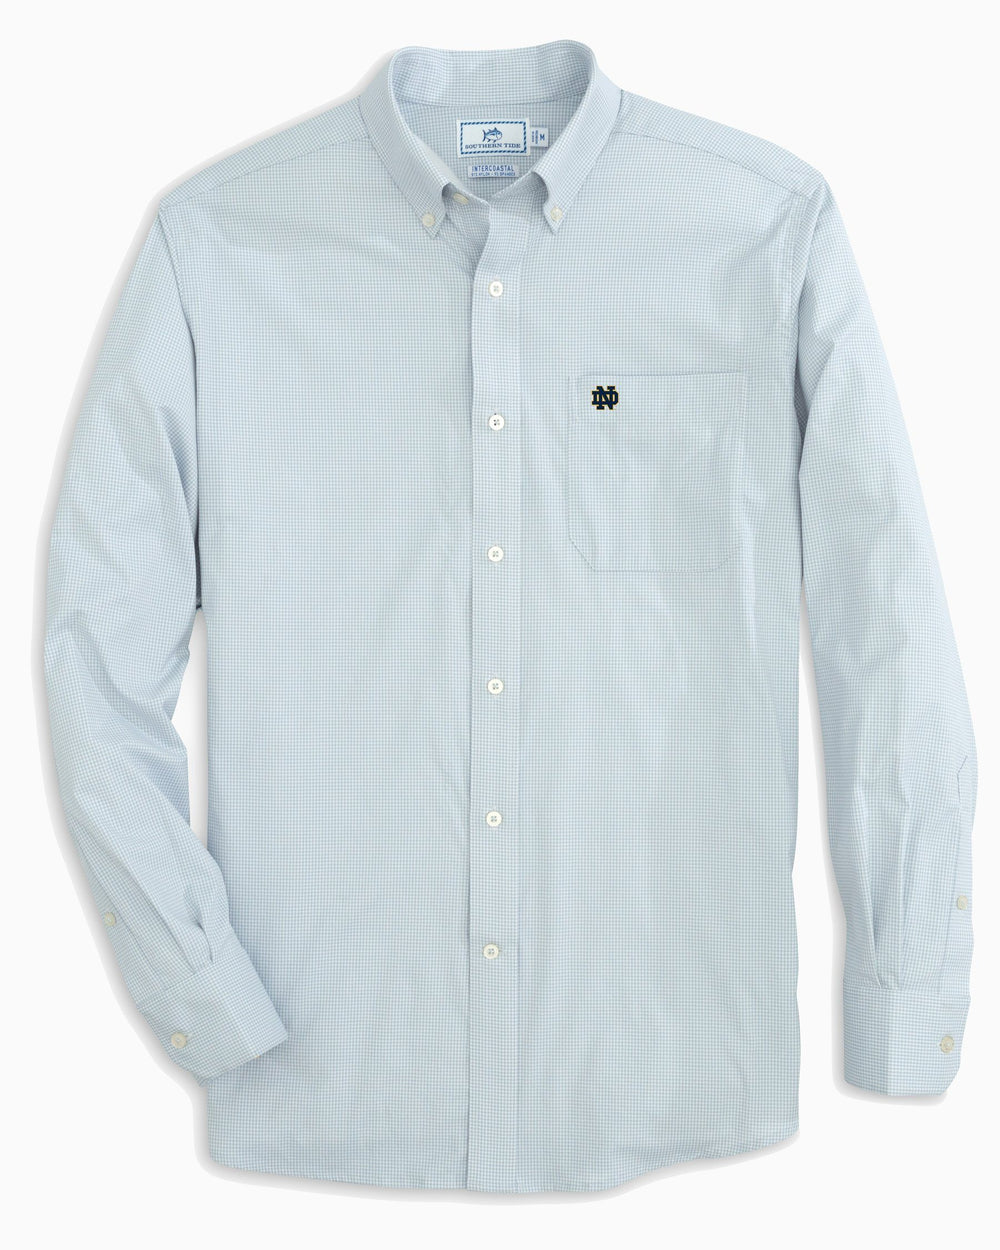 The front view of the Men's Grey Notre Dame Fighting Irish Gingham Button Down Shirt by Southern Tide - Slate Grey